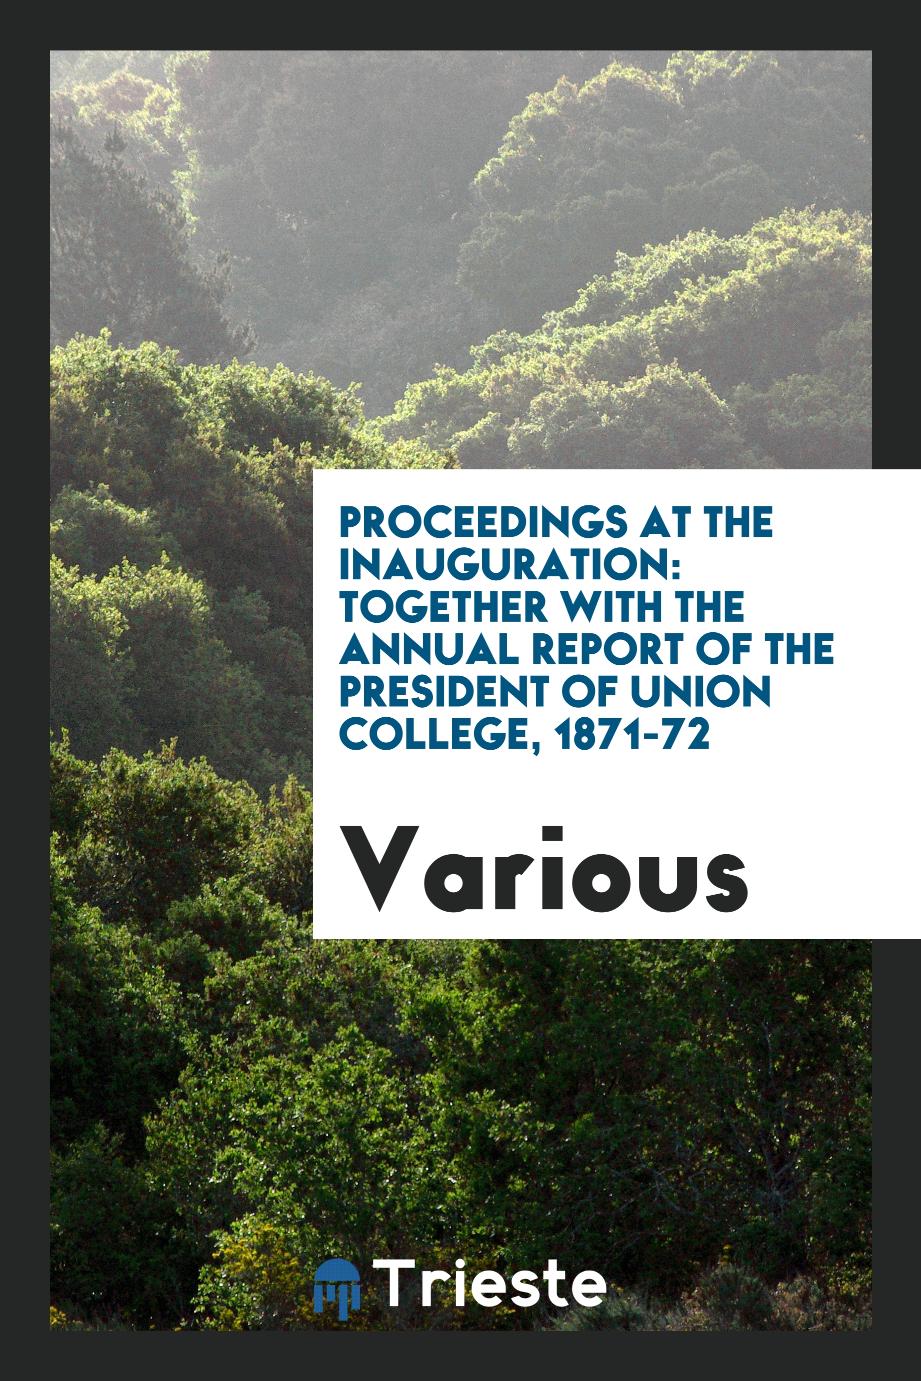 Proceedings at the Inauguration: Together with the Annual Report of the President of Union College, 1871-72